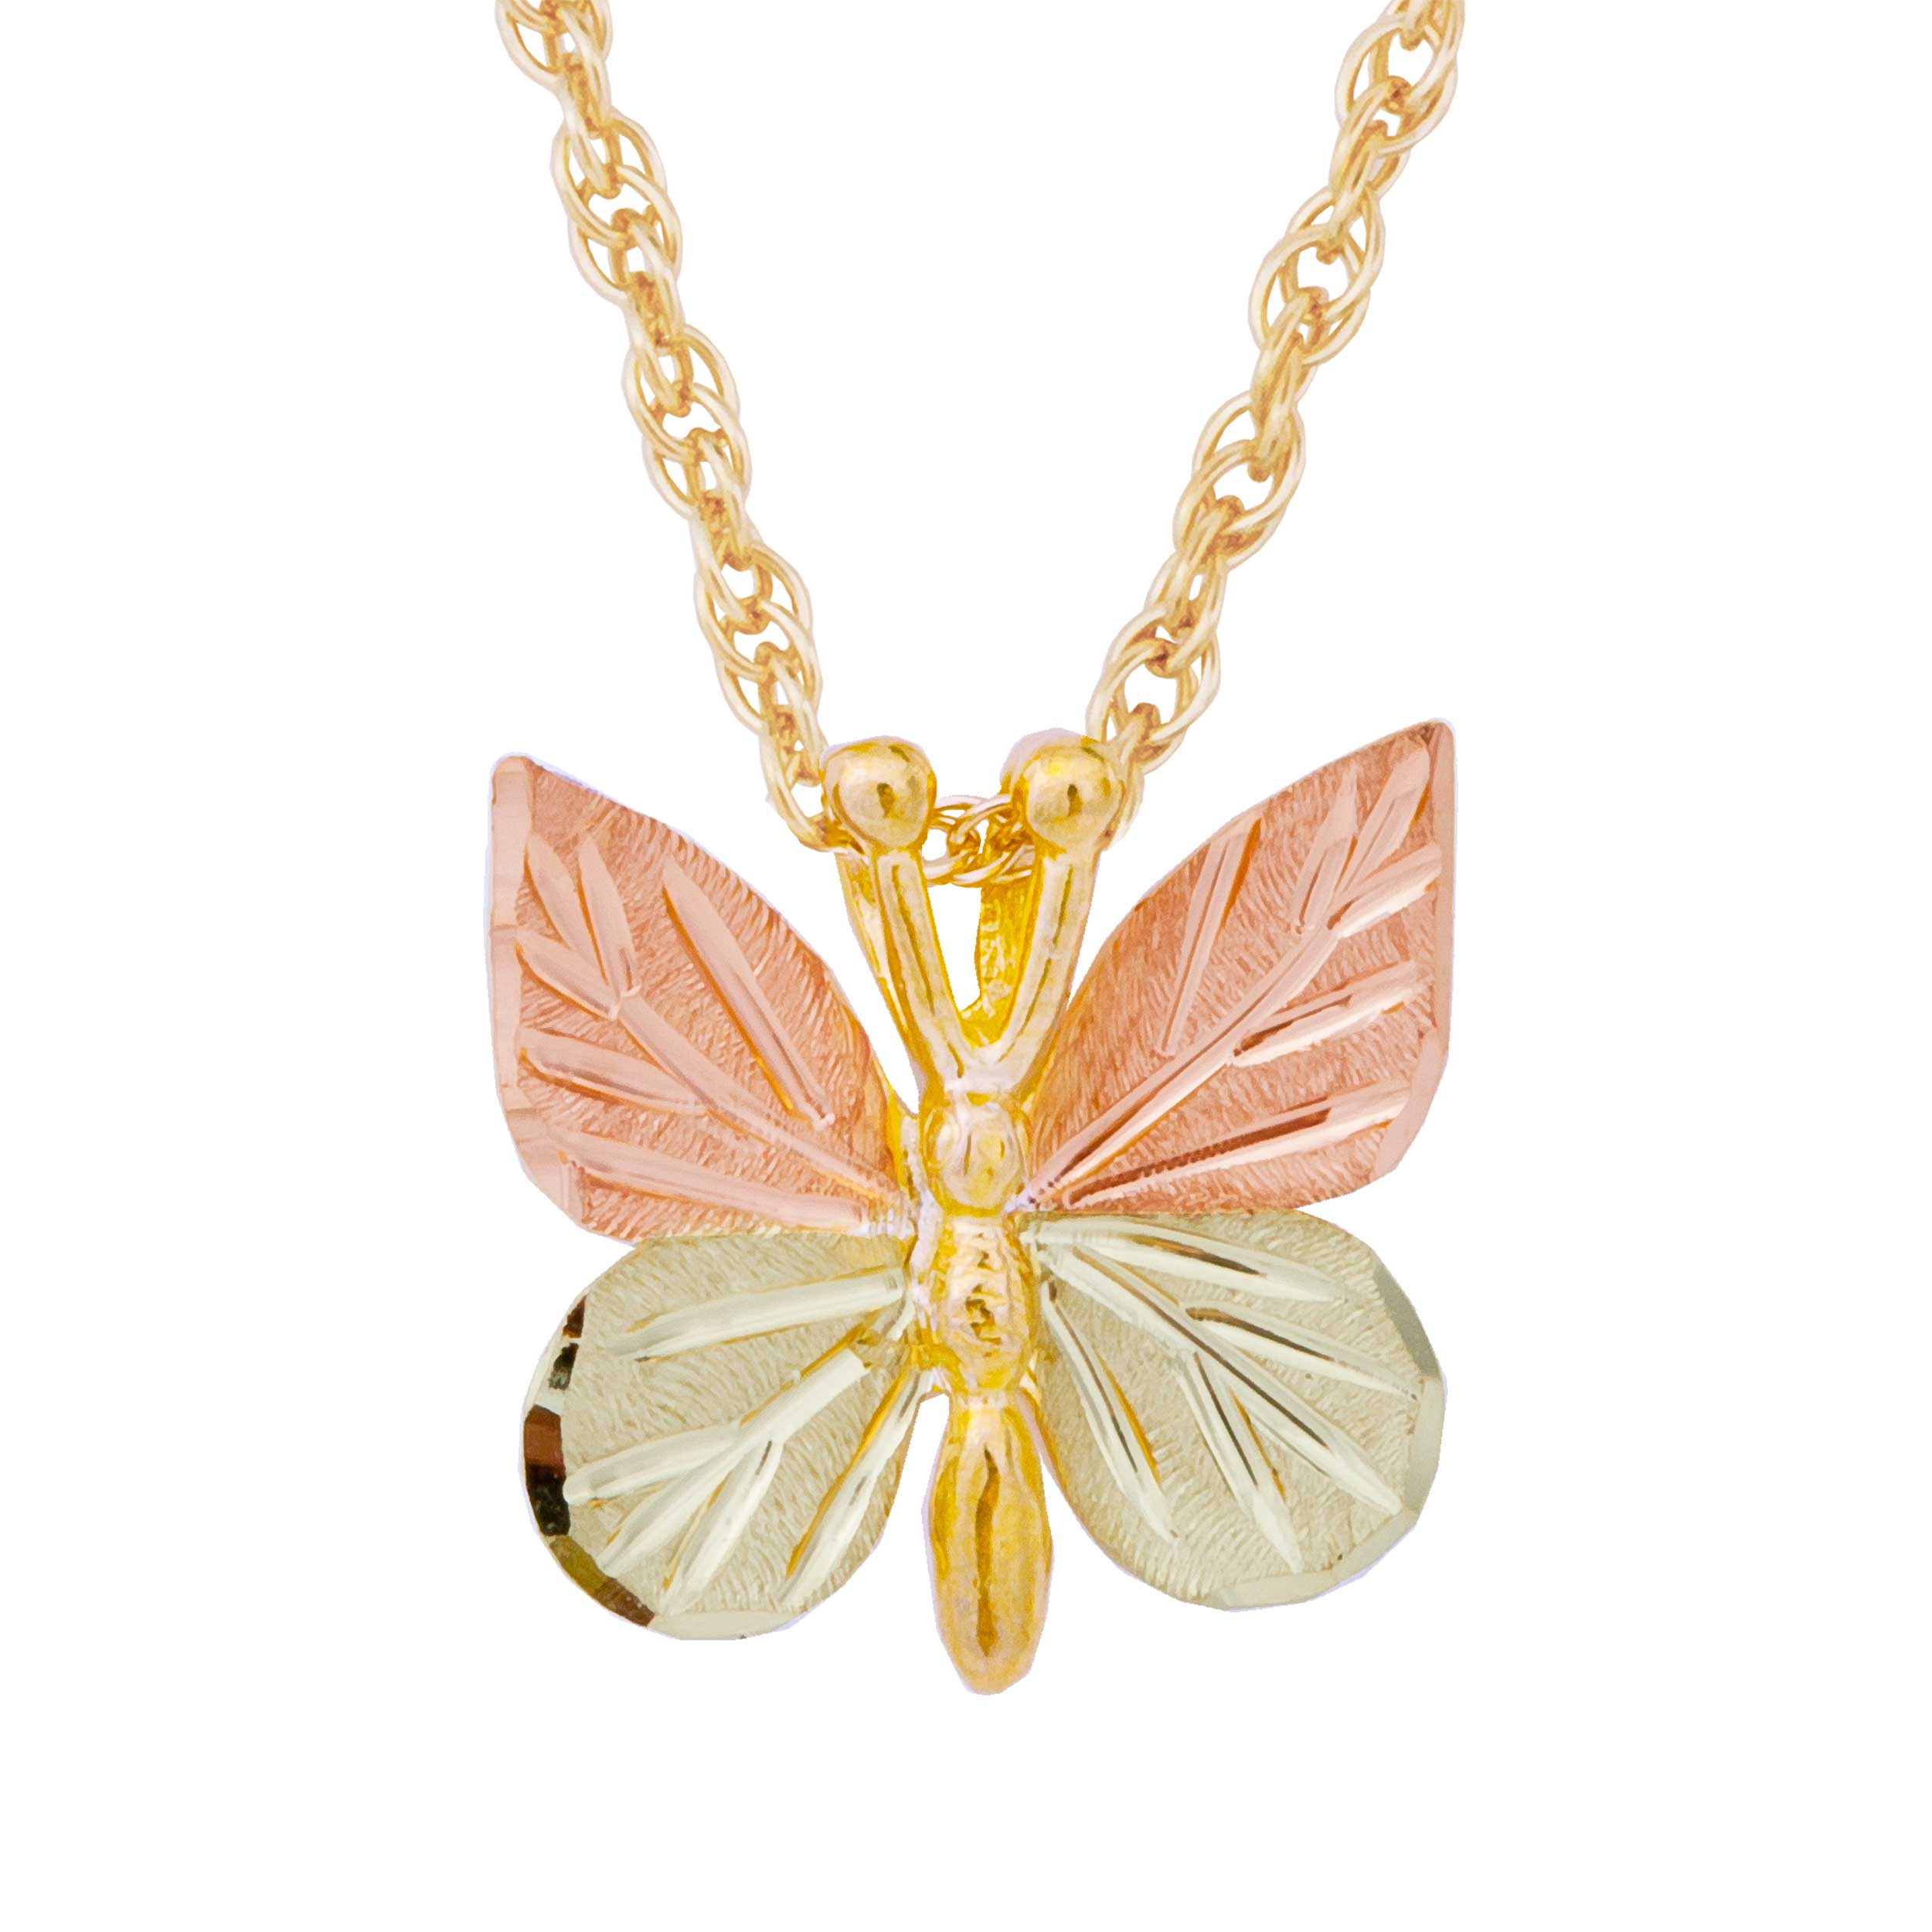 Black Hills Gold Necklace with Butterfly Pendent. 